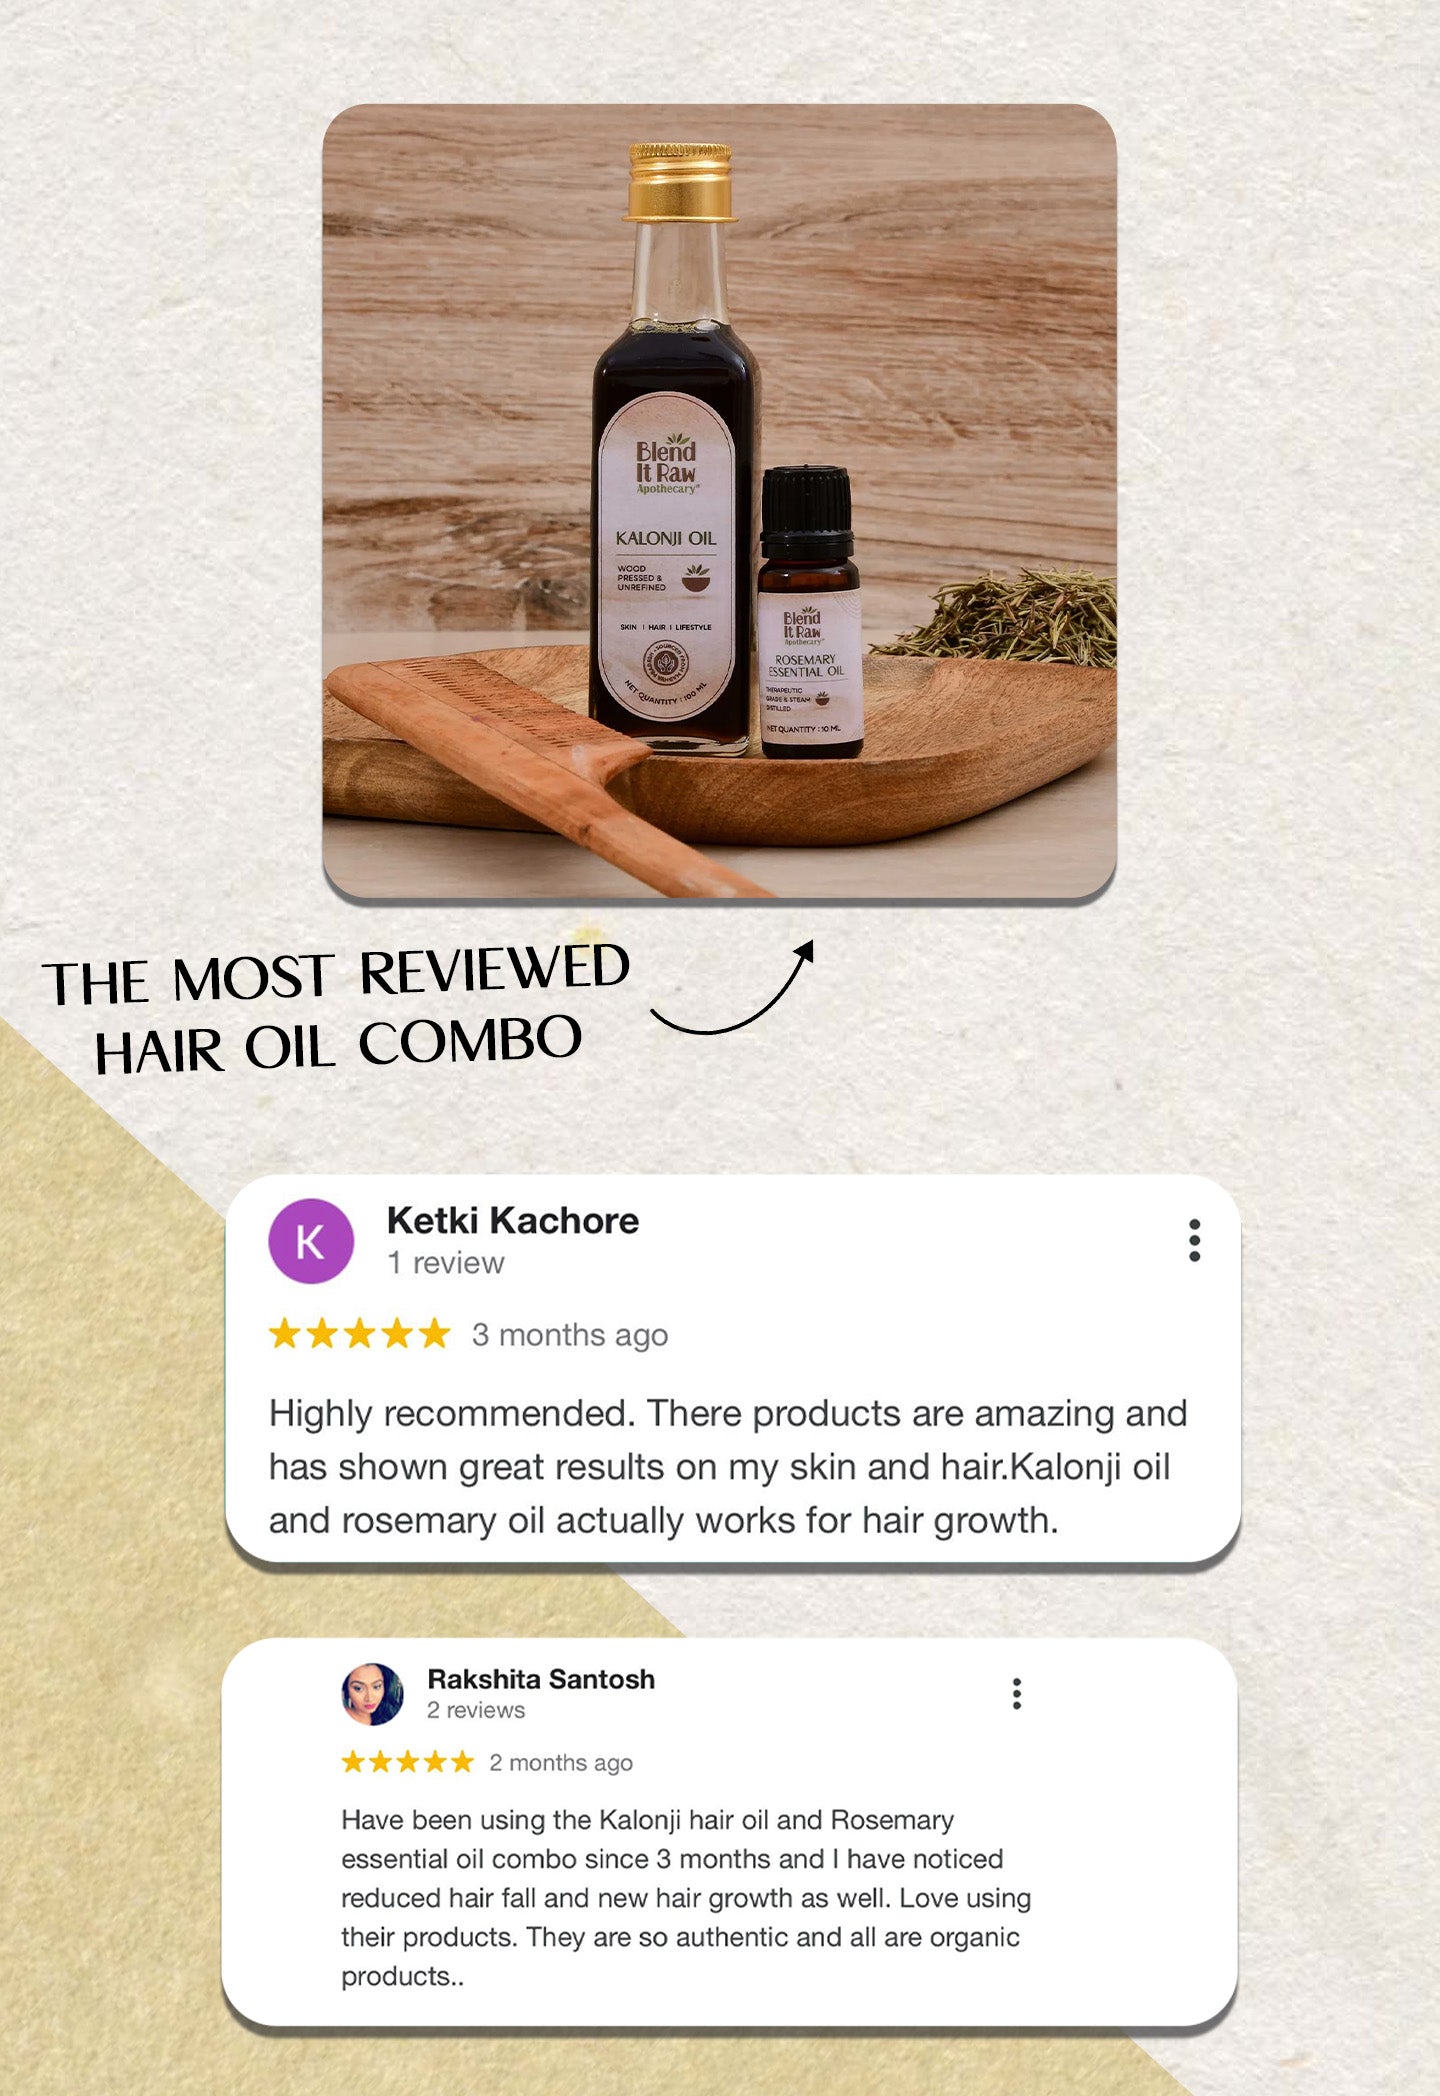 Most reviewed hair oil combo mobile version of image